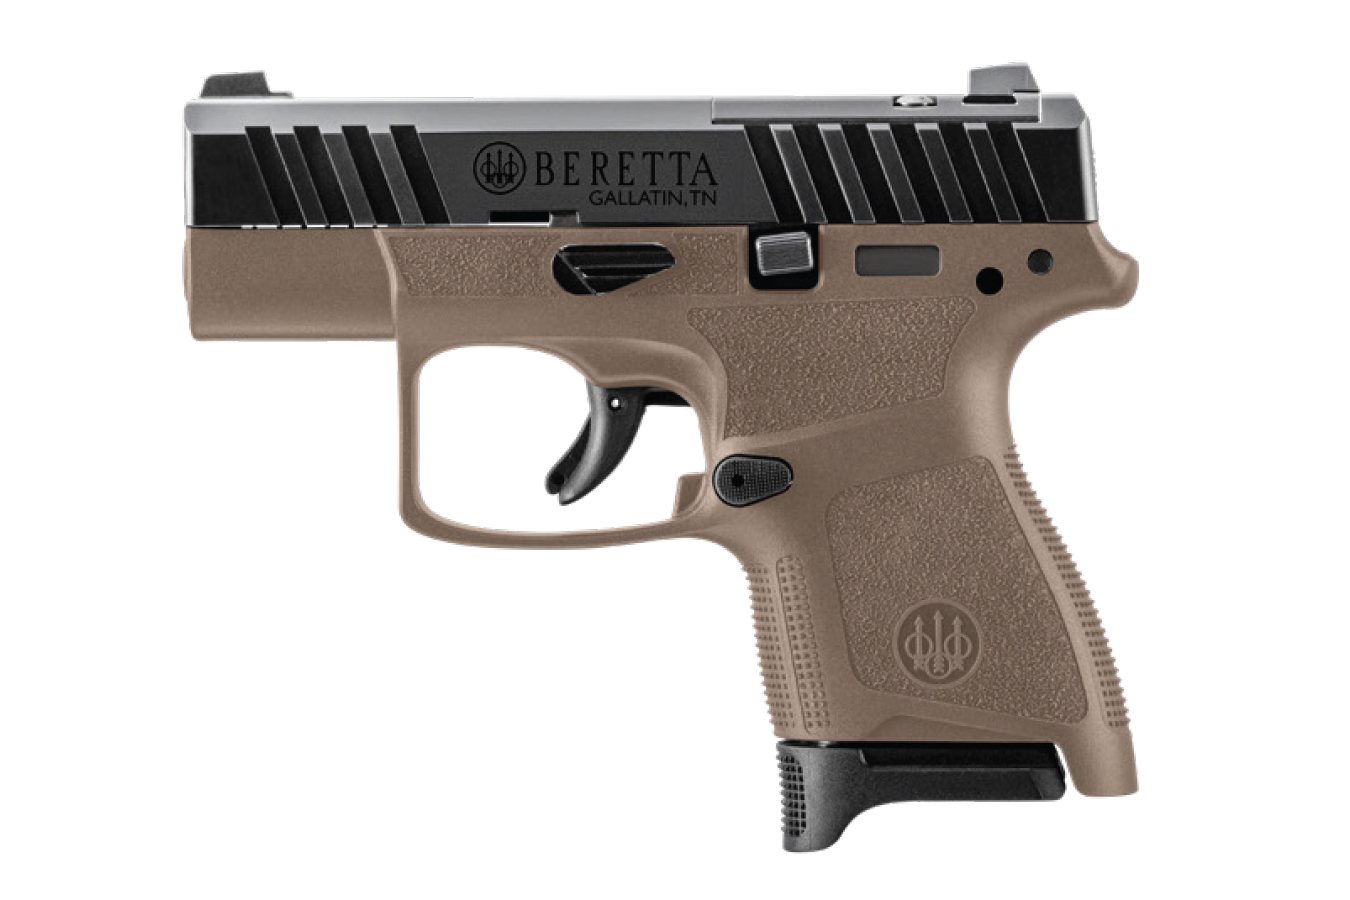 BERETTA APX-A1 CARRY 9MM PISTOL WITH FDE FRAME